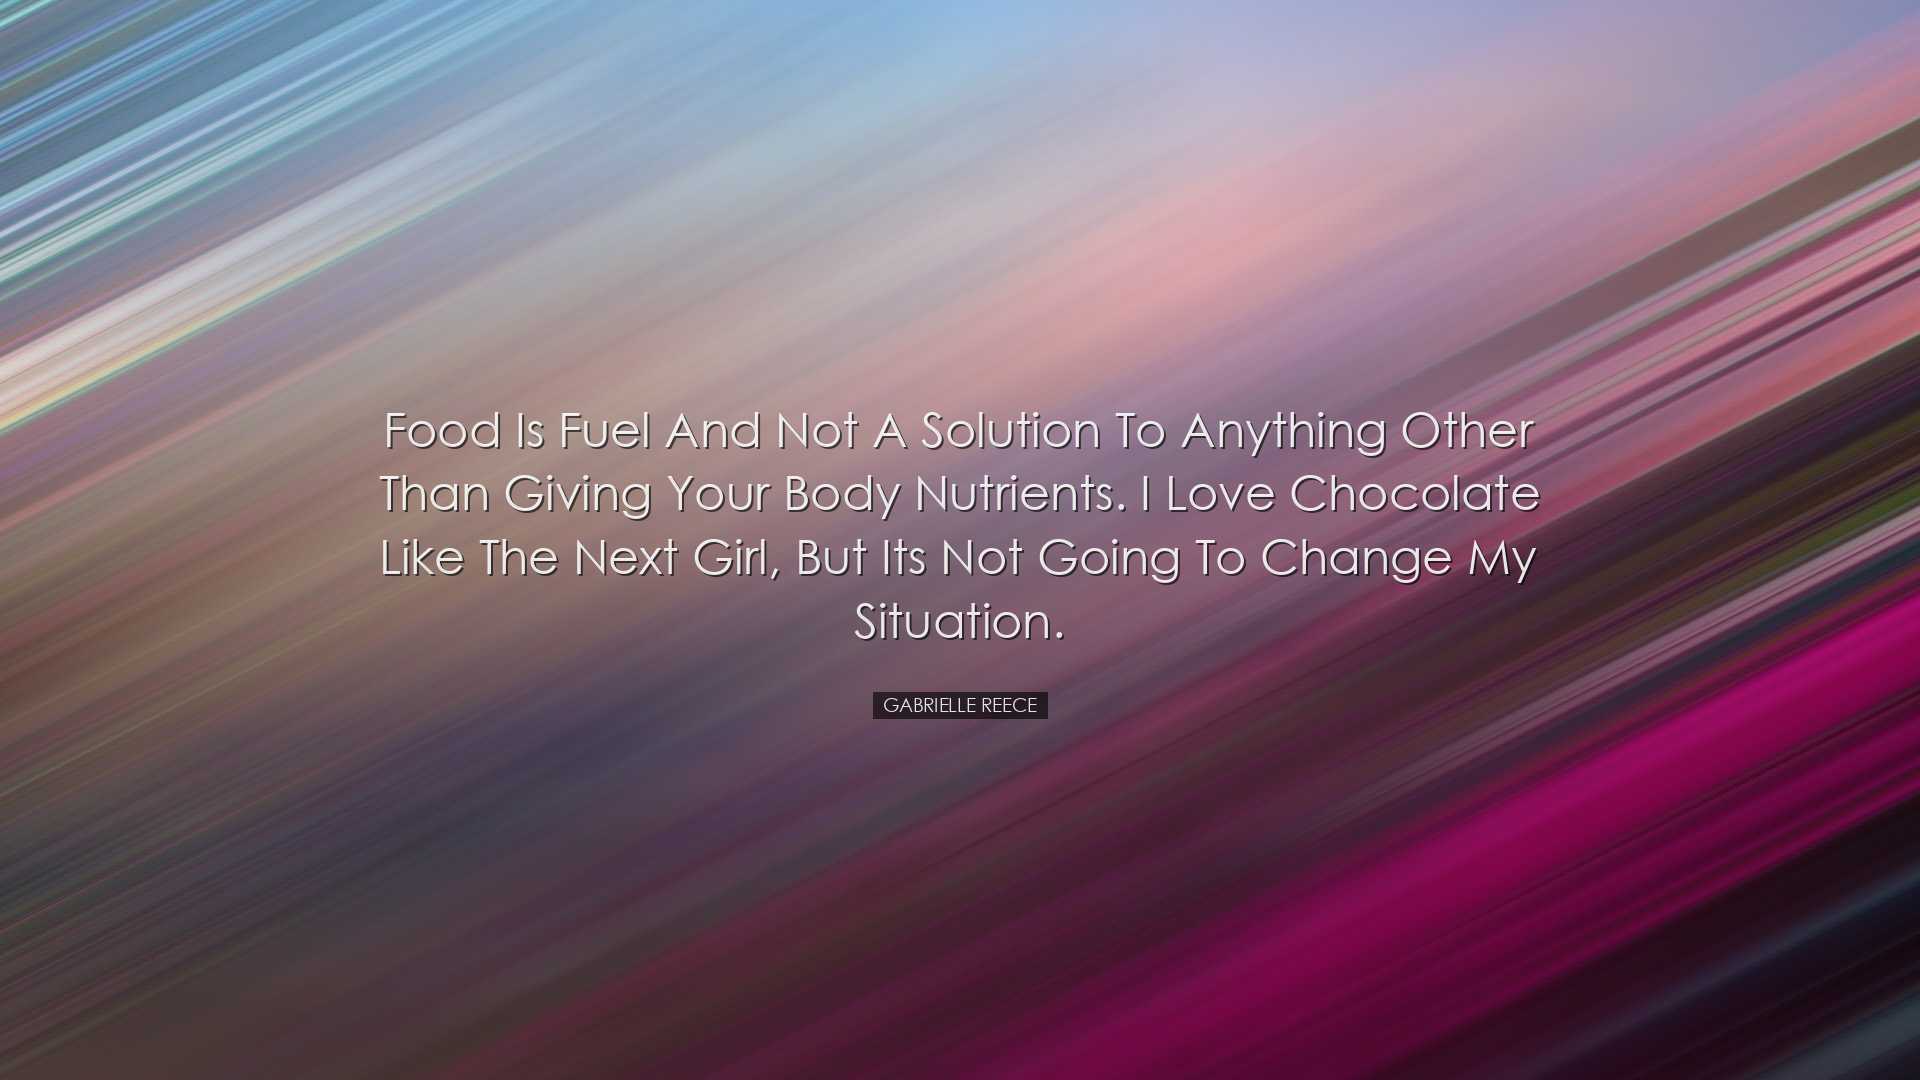 Food is fuel and not a solution to anything other than giving your